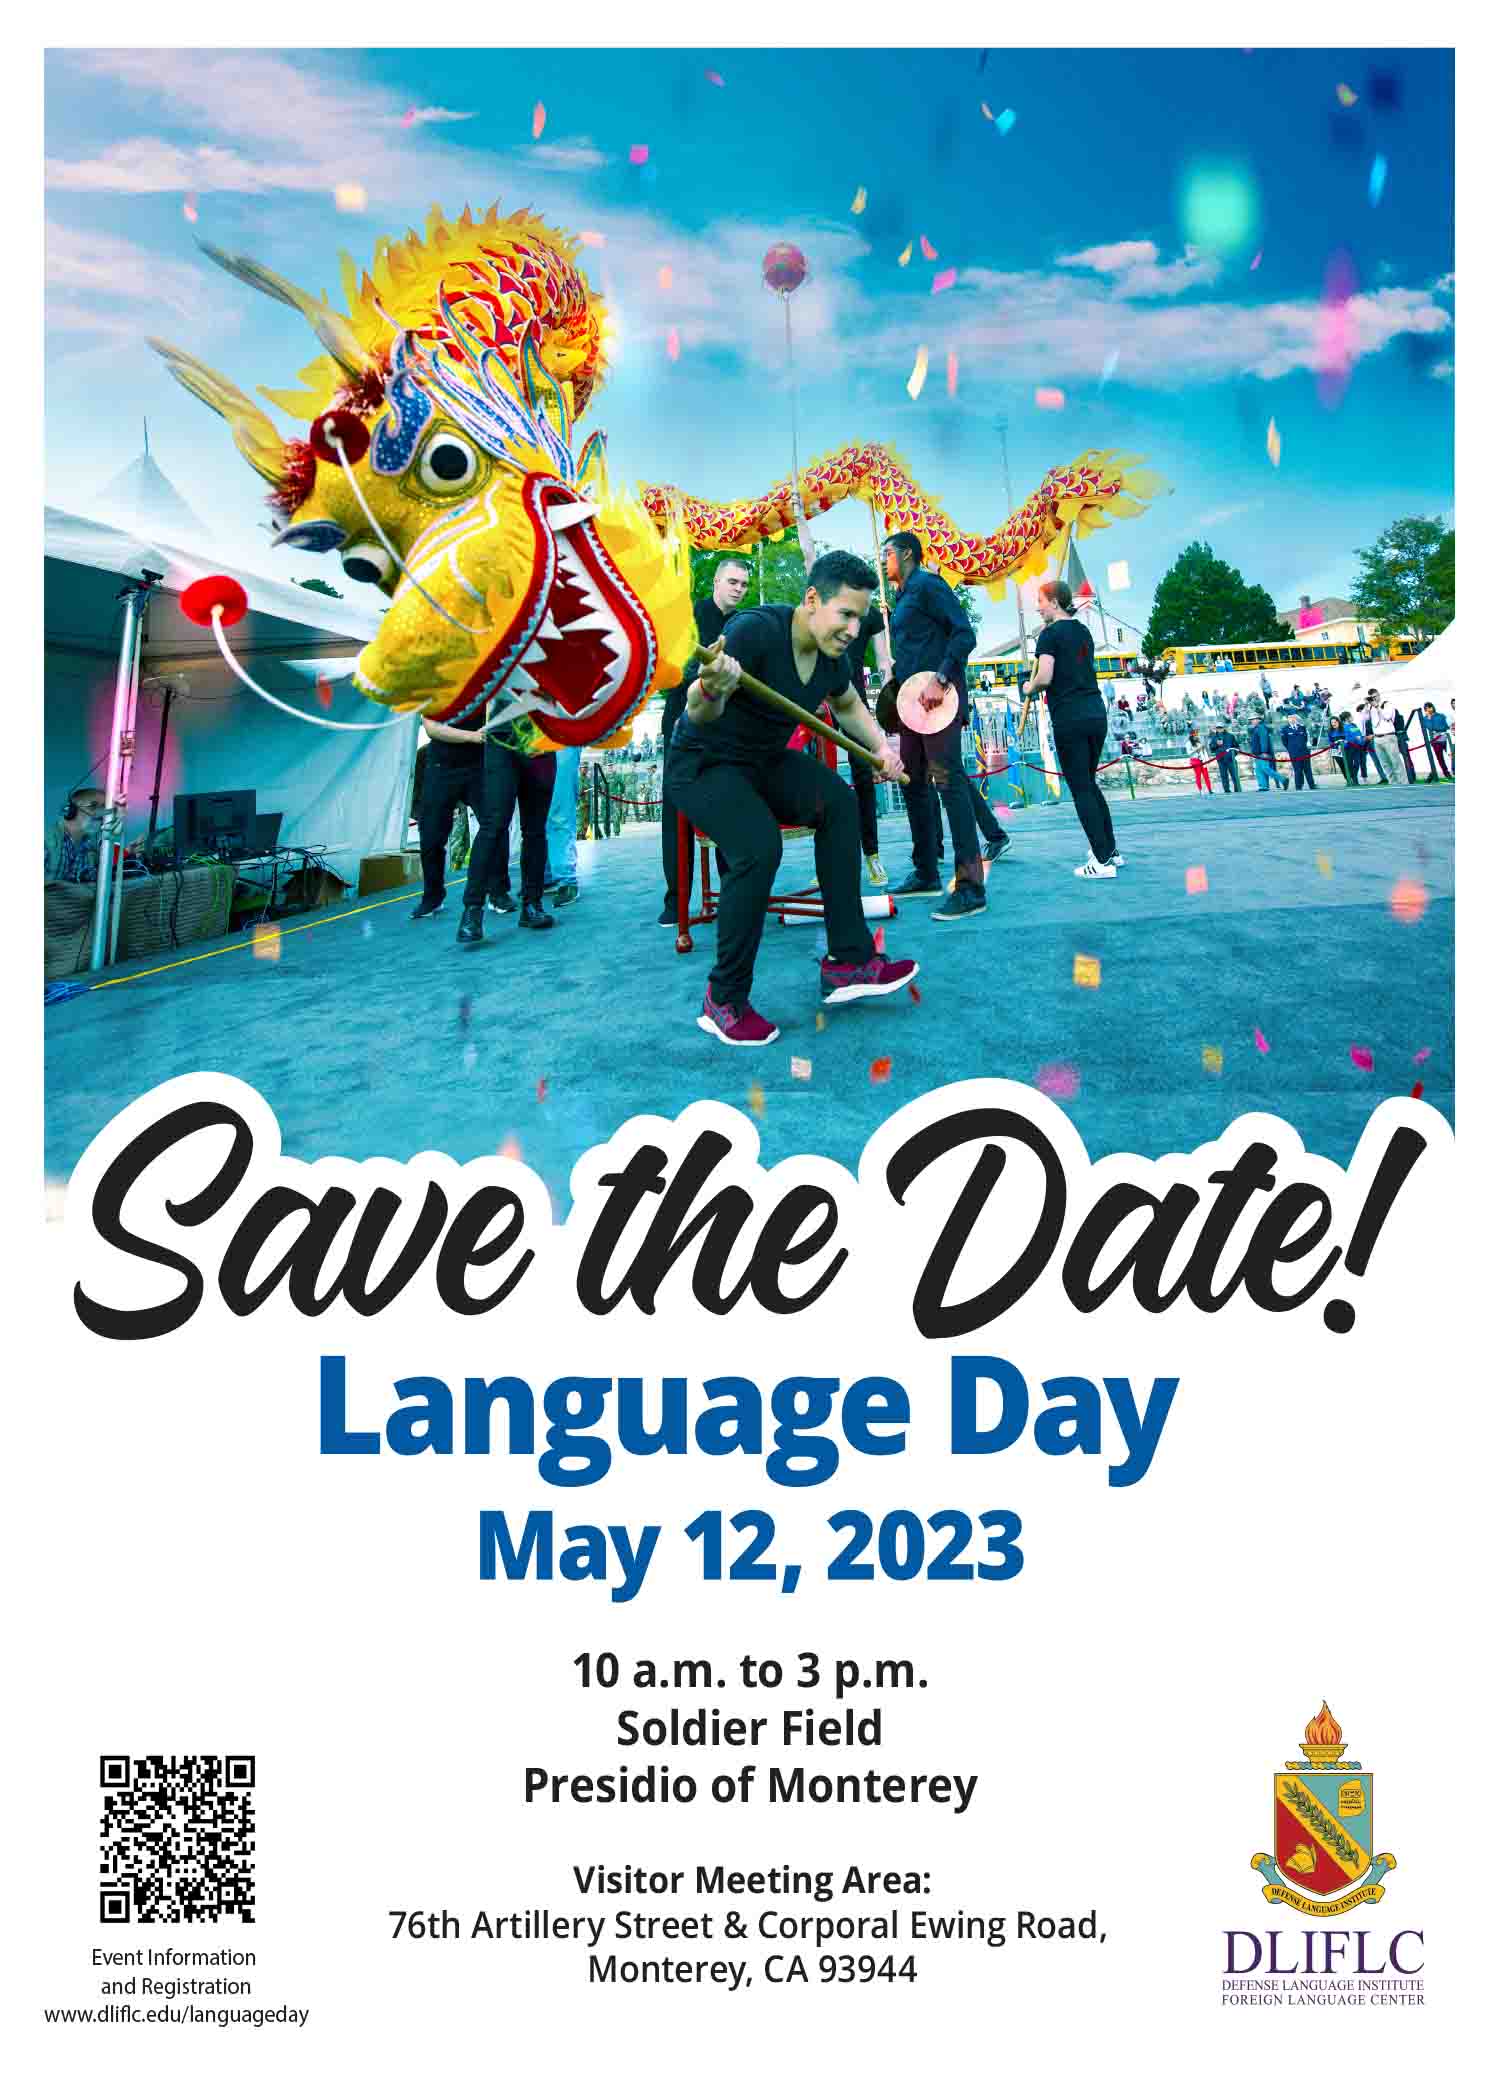 Language Day 2023 - Save the Date!